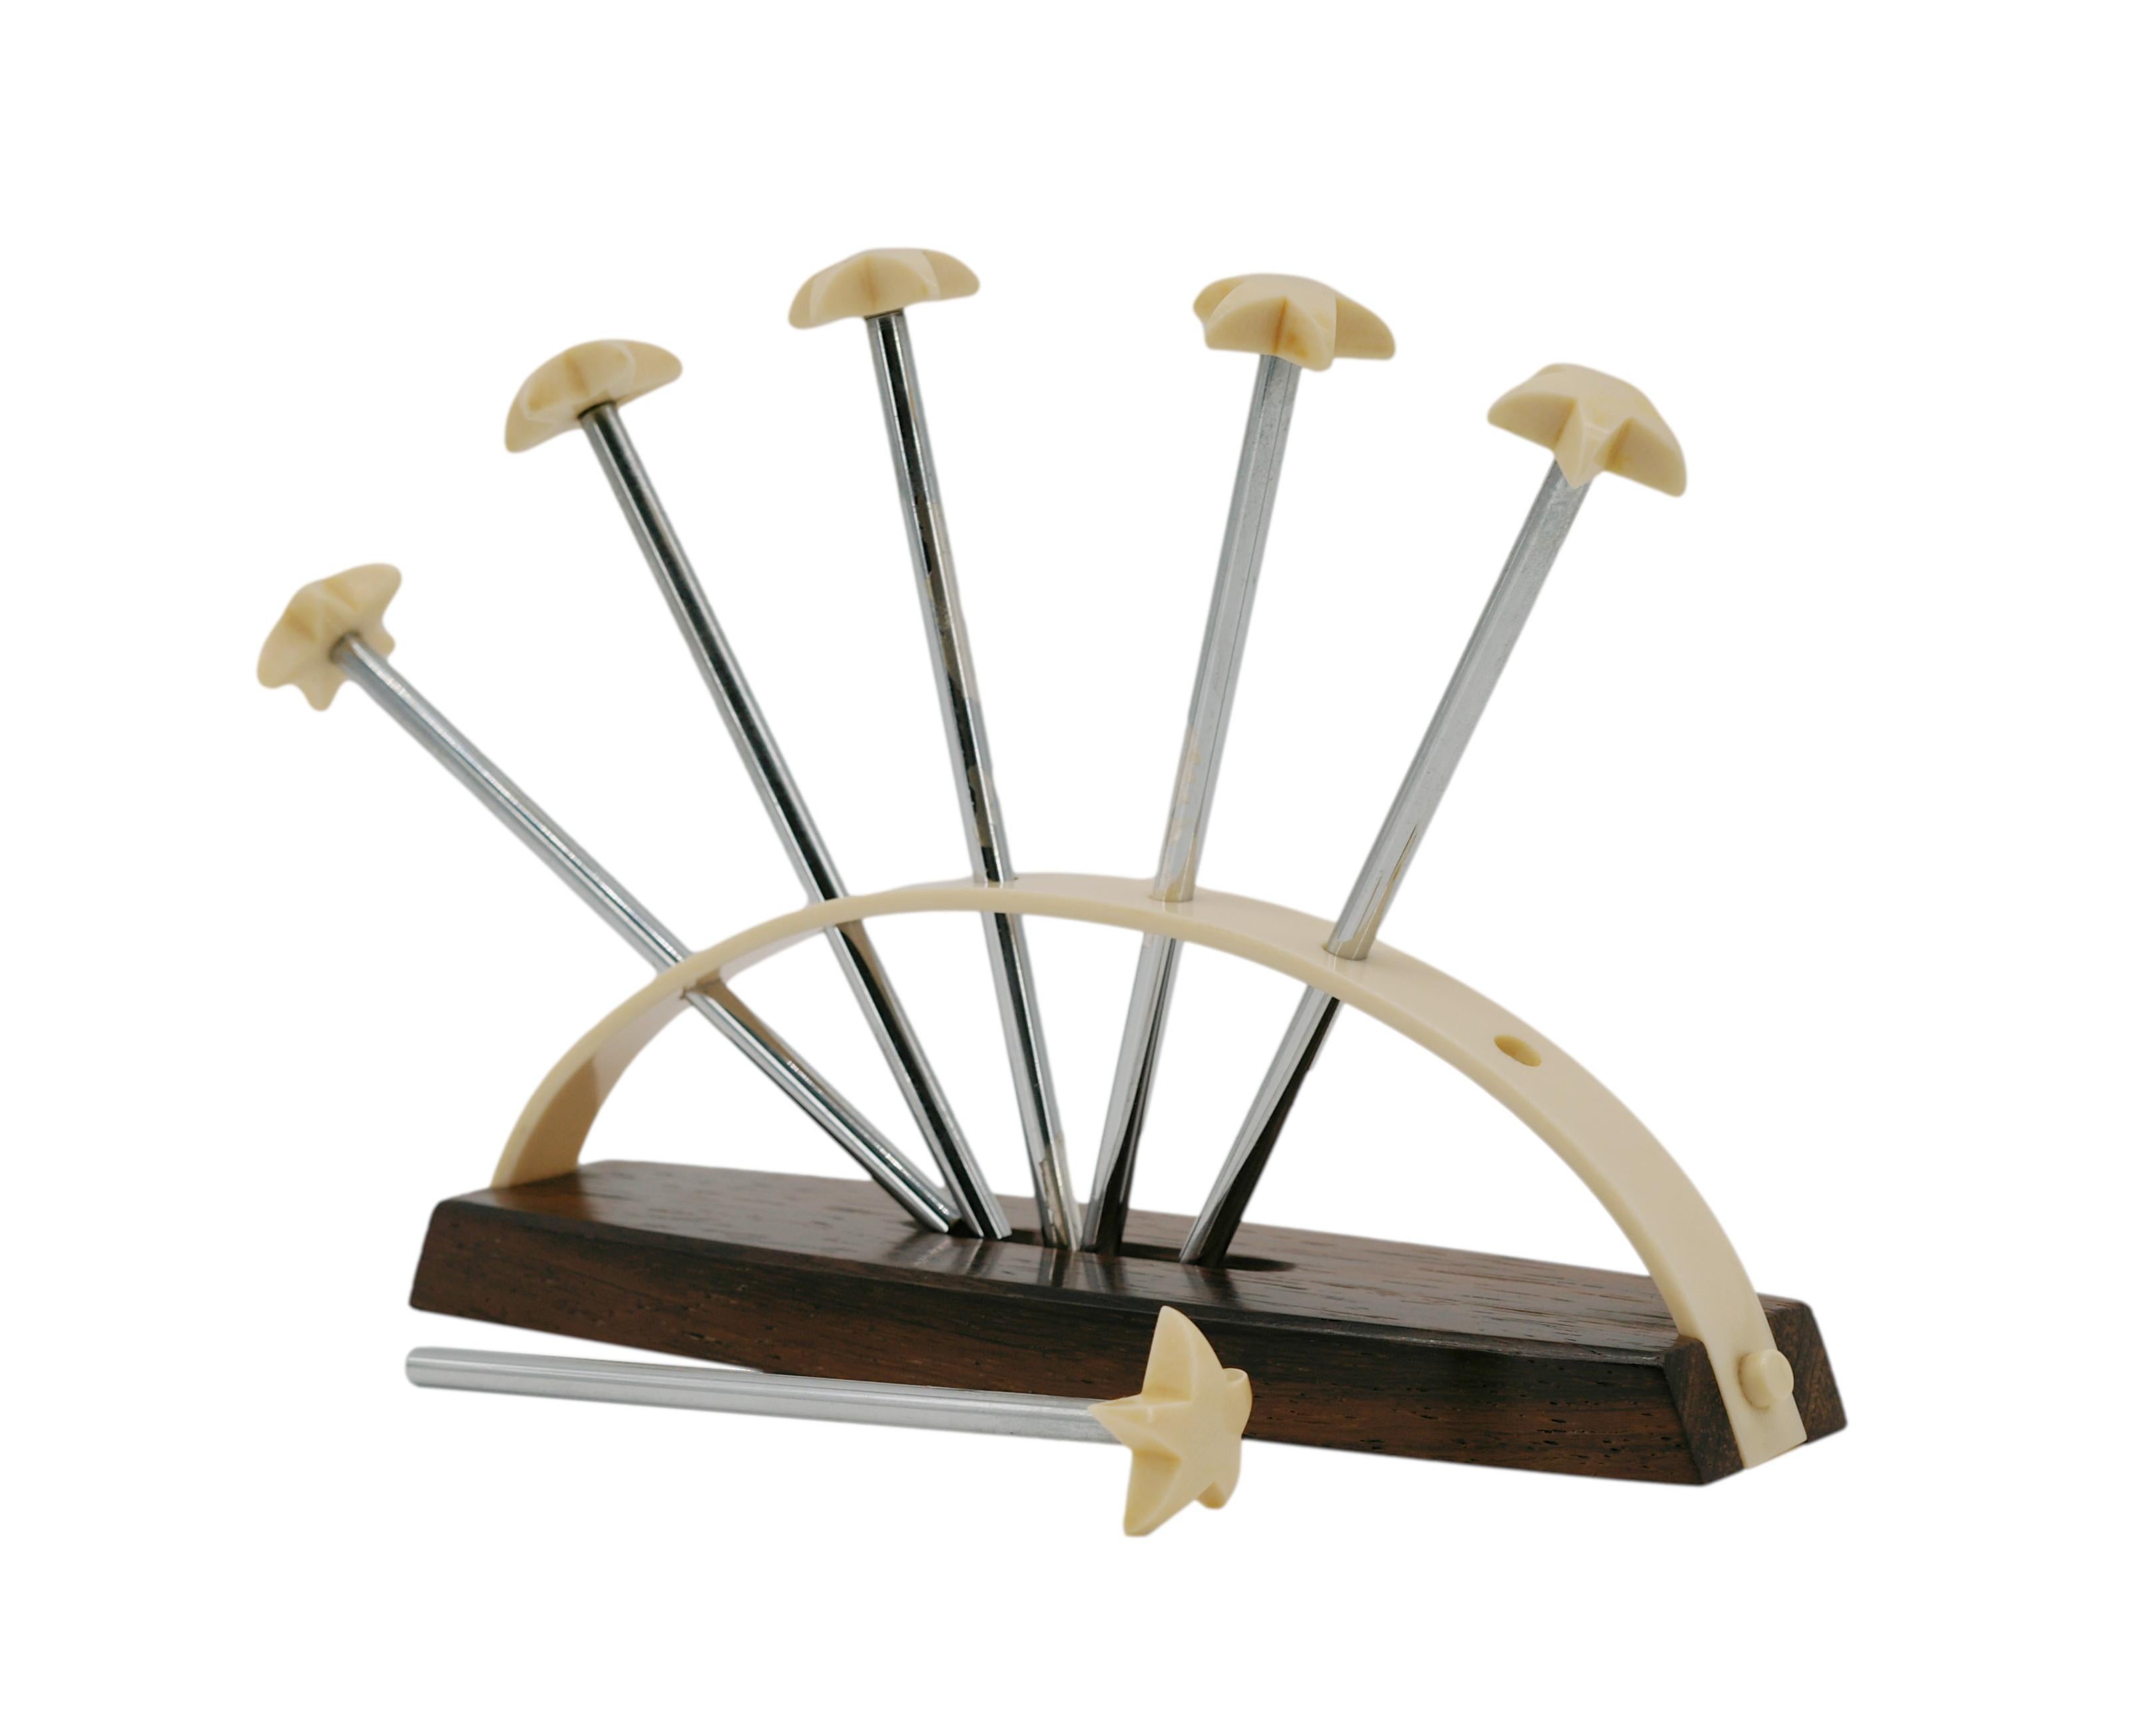 Mid-20th Century French Art Deco Bakelite Cocktail Stirrers, 1930s For Sale